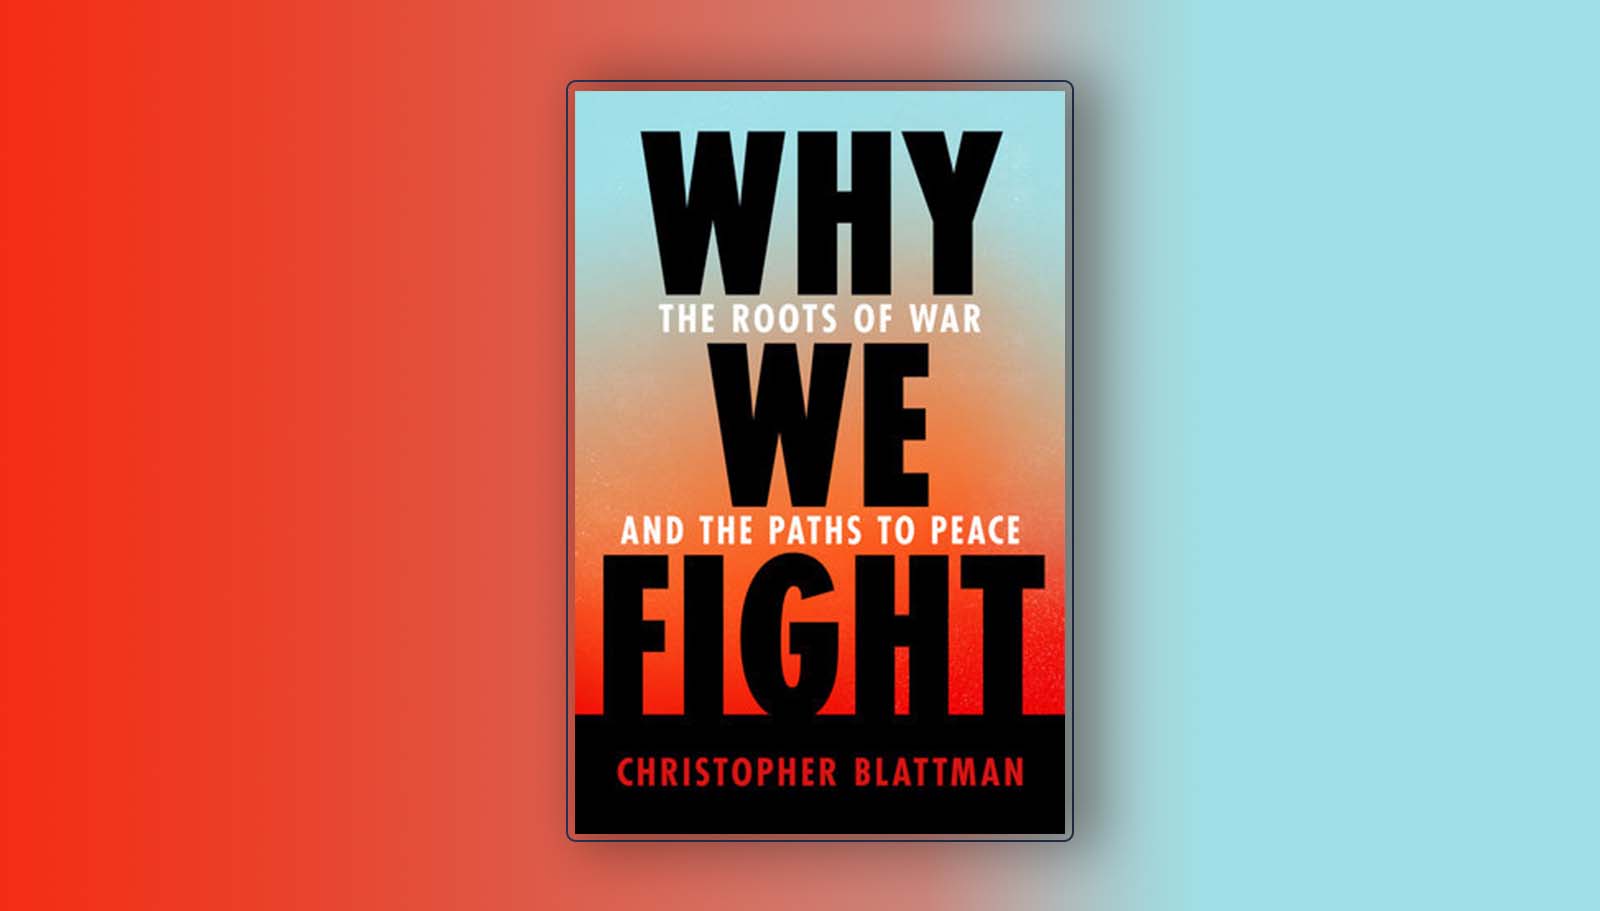 Photo: Cover of Why We Fight: The roots of war and paths to peace by Christopher Blattman. Credit: Penguin Random House.